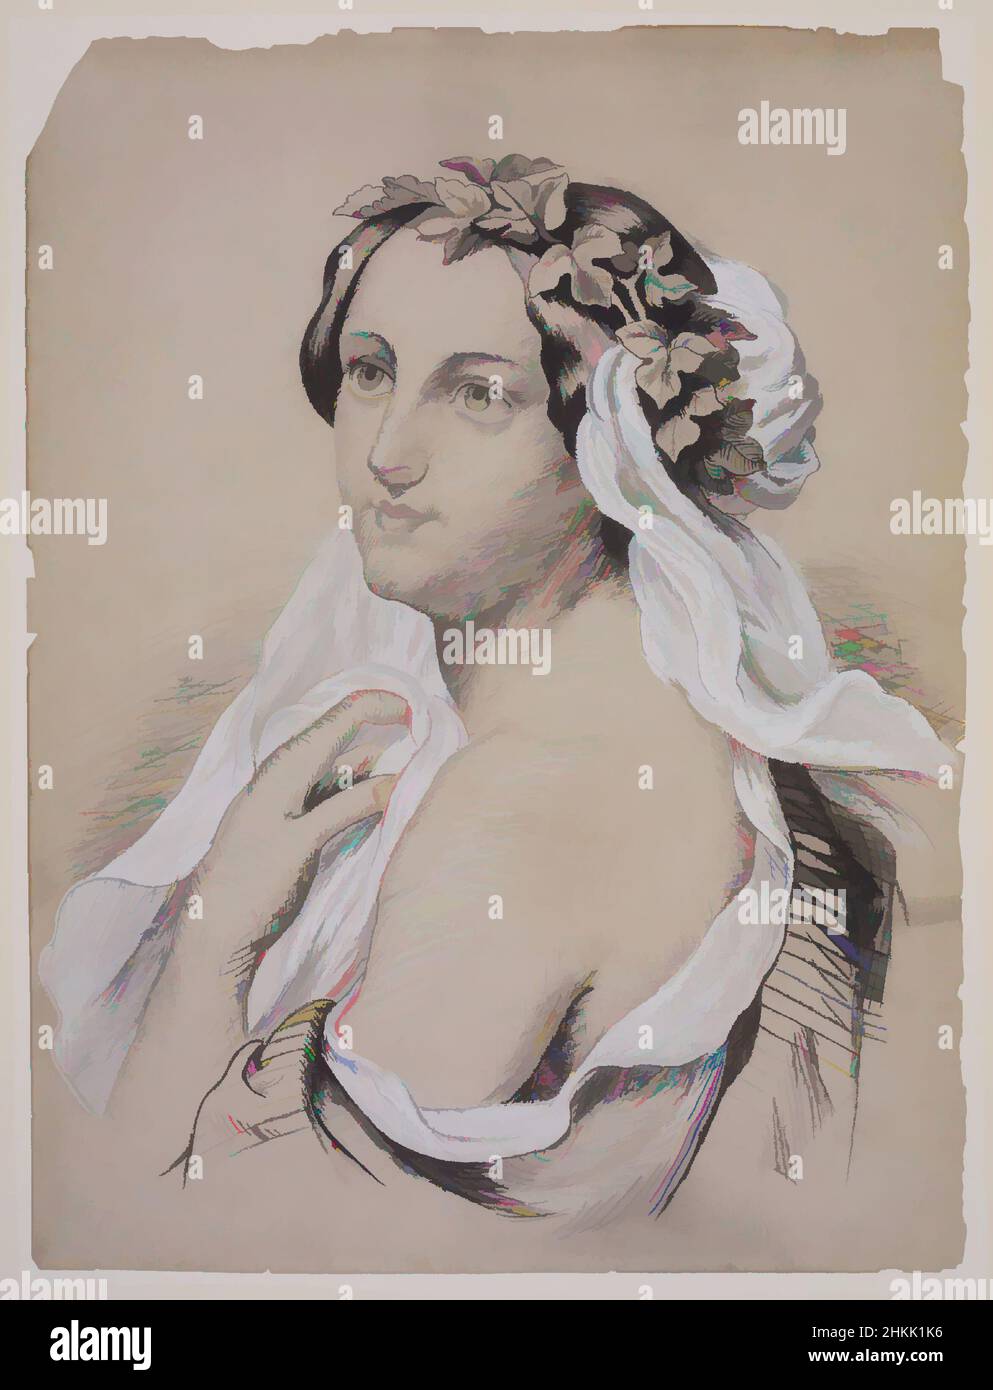 Art inspired by Portrait of a Woman Adorned with a Wreath of Leaves, Jane E. Sloan, White chalk and black media, probably oil pastel or conté over graphite on wove paper drymounted to a matboard backing, 19th century, Sheet: 18 x 13 1/2 in., 45.7 x 34.3 cm, 19th Century, beauty, female, Classic works modernized by Artotop with a splash of modernity. Shapes, color and value, eye-catching visual impact on art. Emotions through freedom of artworks in a contemporary way. A timeless message pursuing a wildly creative new direction. Artists turning to the digital medium and creating the Artotop NFT Stock Photo